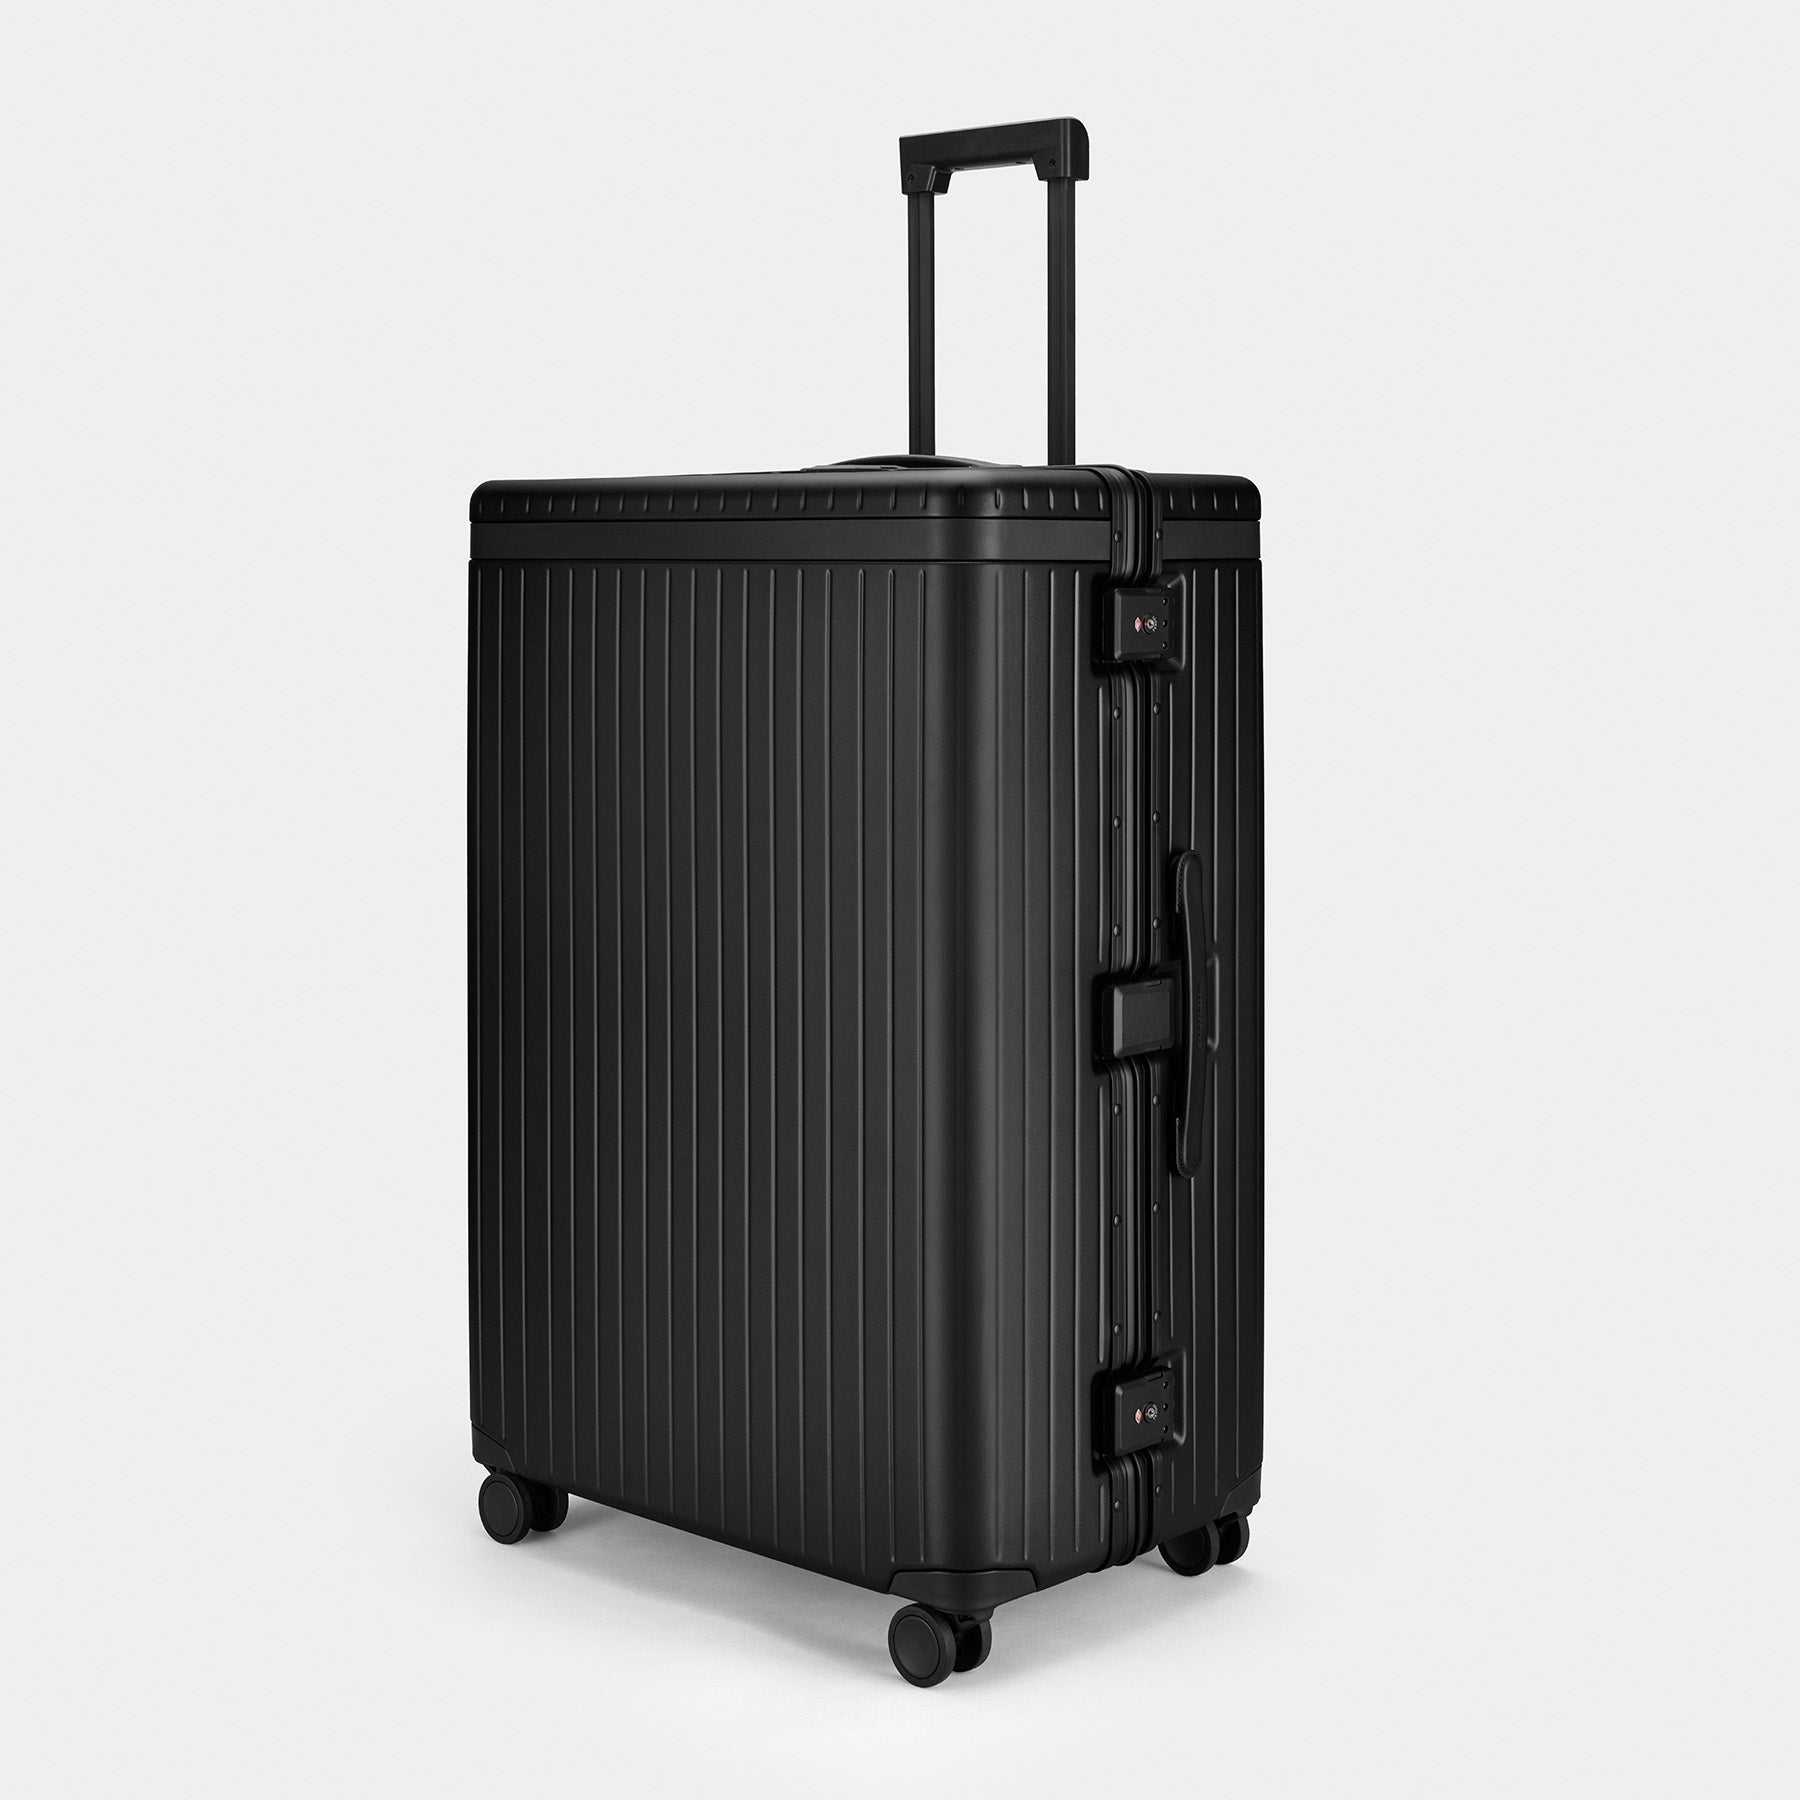 The Large Check-in - Return Black / Black / Smooth Extra-large hard-shell suitcase